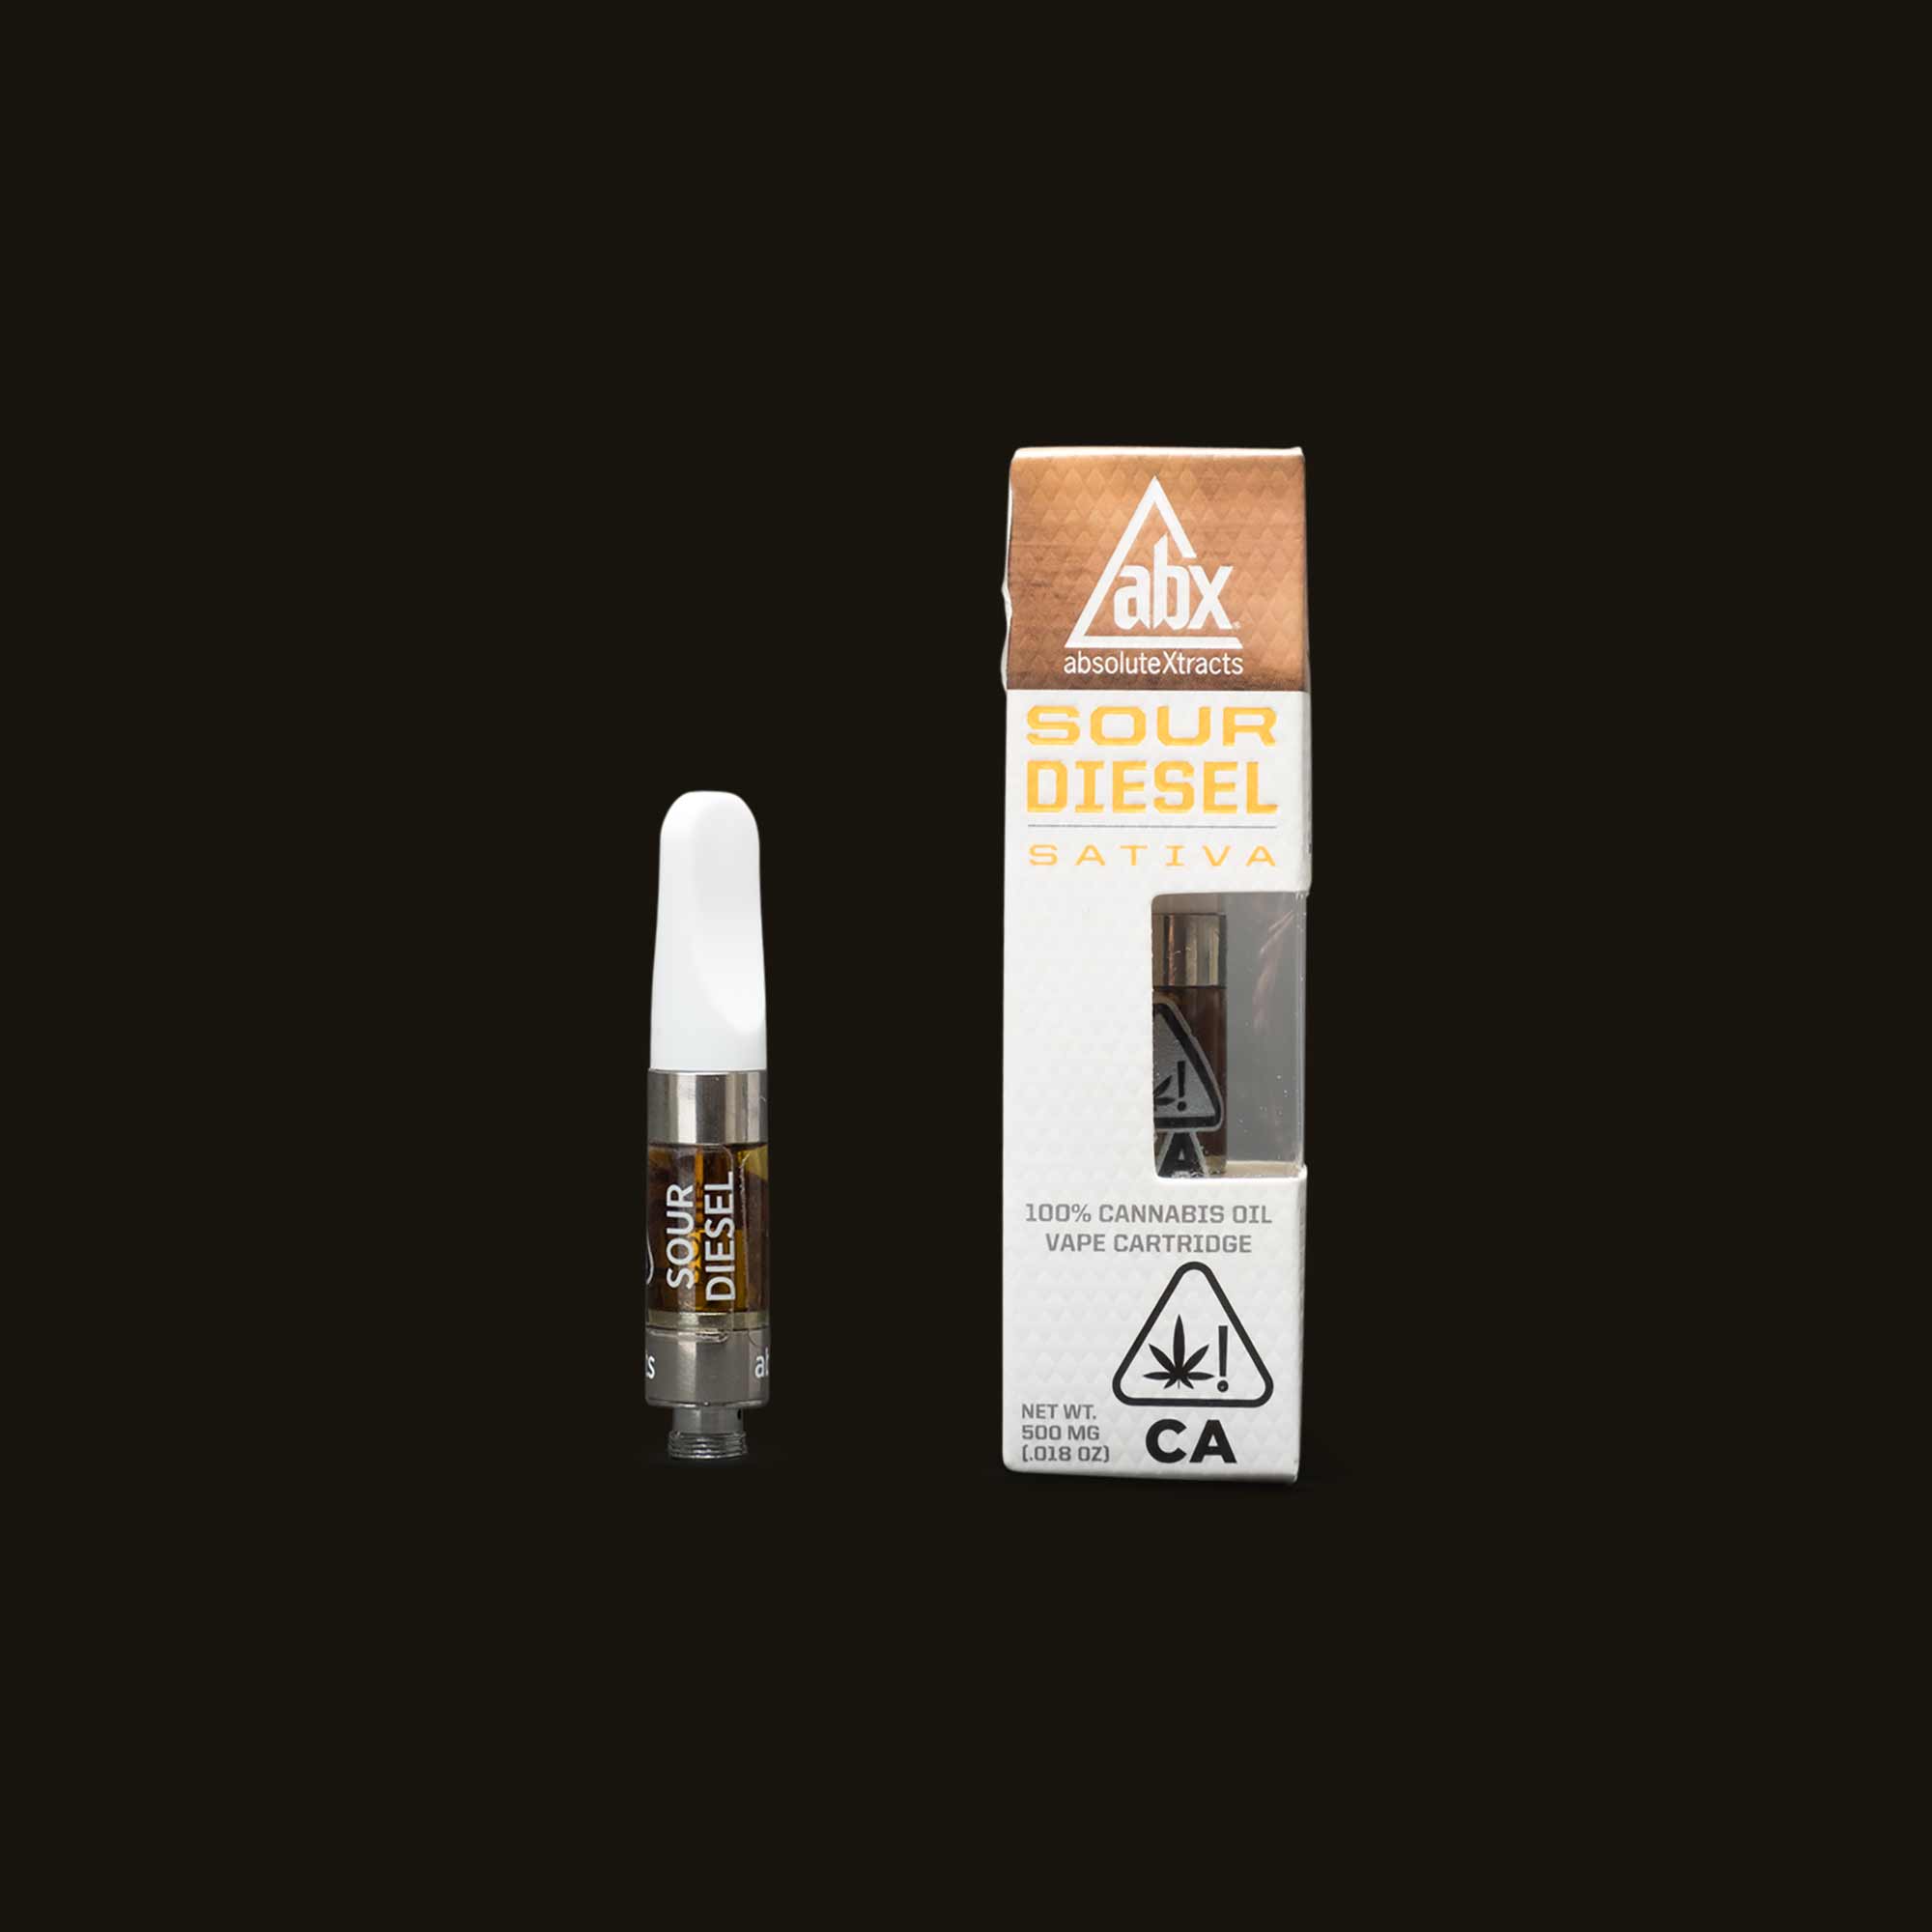 CA-SF-SEPTEMBER-2019-ABSOLUTE-XTRACTS-SOUR-DIESEL-CARTRIDGE-4-609925